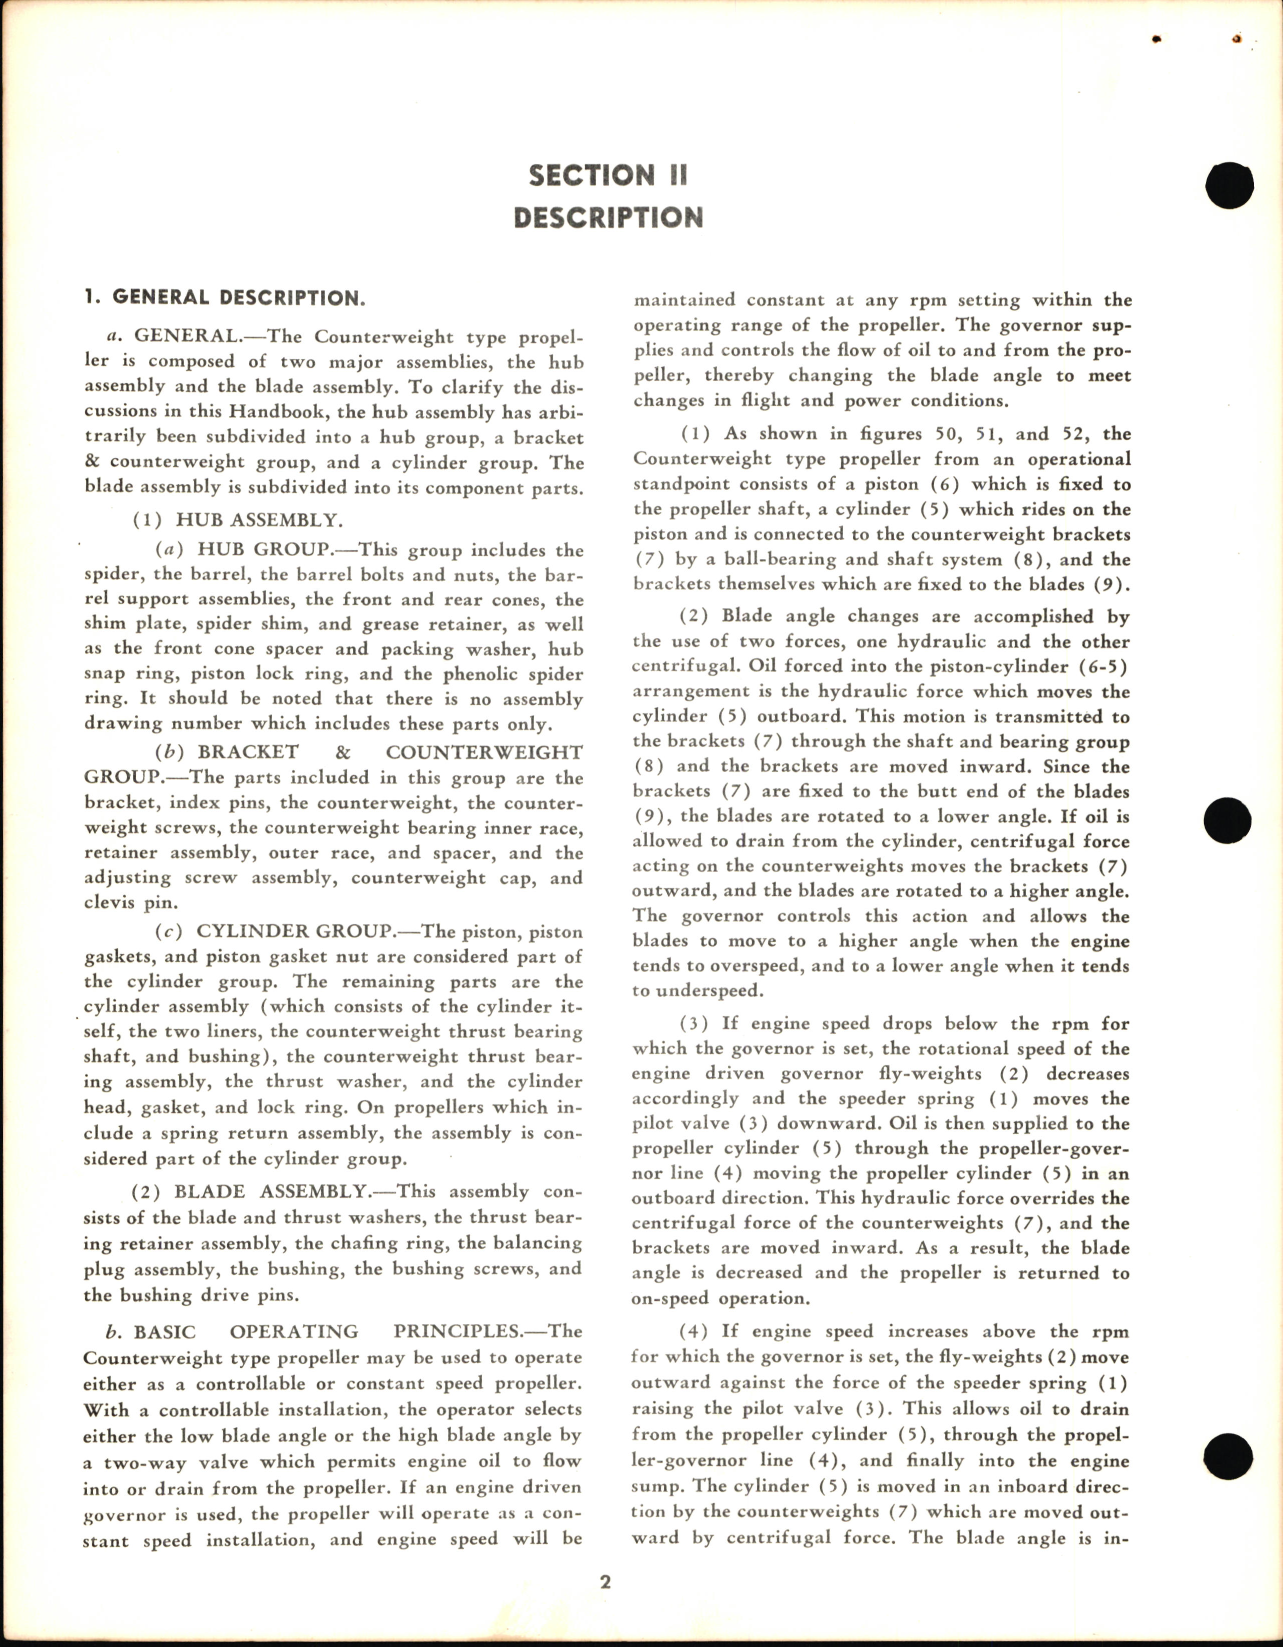 Sample page 8 from AirCorps Library document: Service Manual for Counterweight Propellers